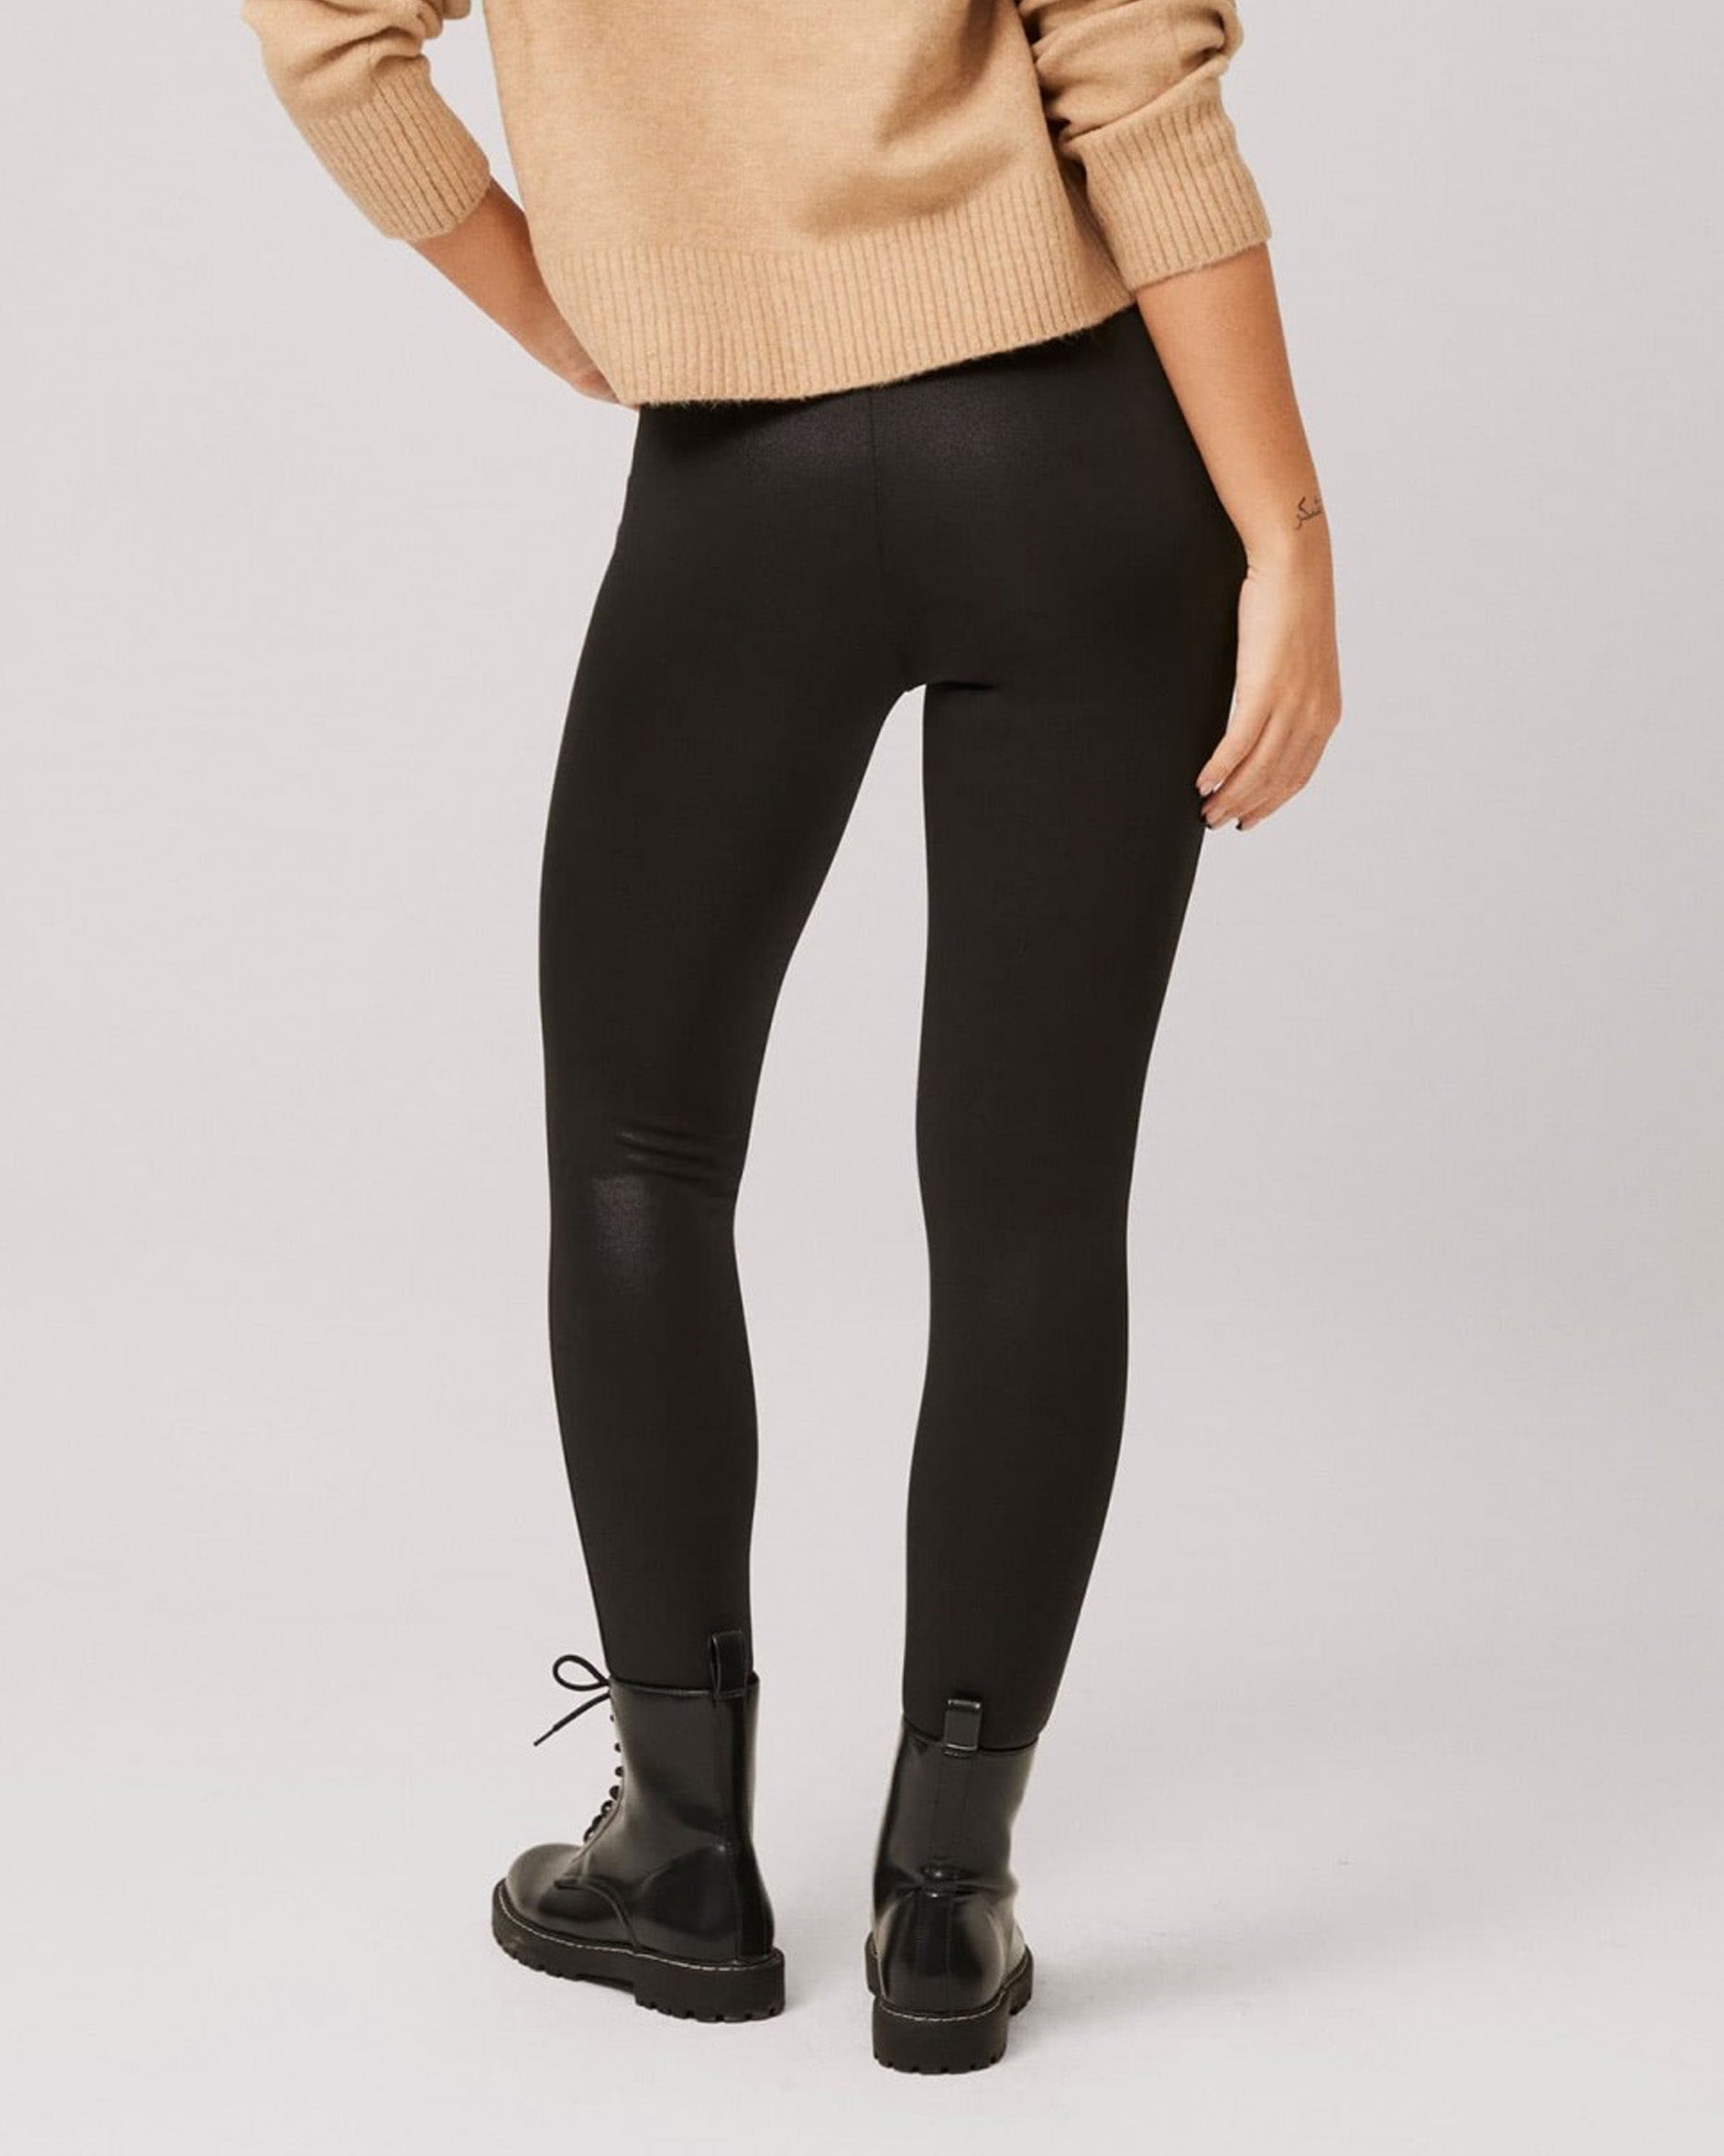 Ysabel Mora 70294 Waxed Thermal Leggings - Black high waisted trouser leggings (treggings) with waxed / faux leather effect coating, warm fleece lining, worn with camel jumper and black patent ankle boots.